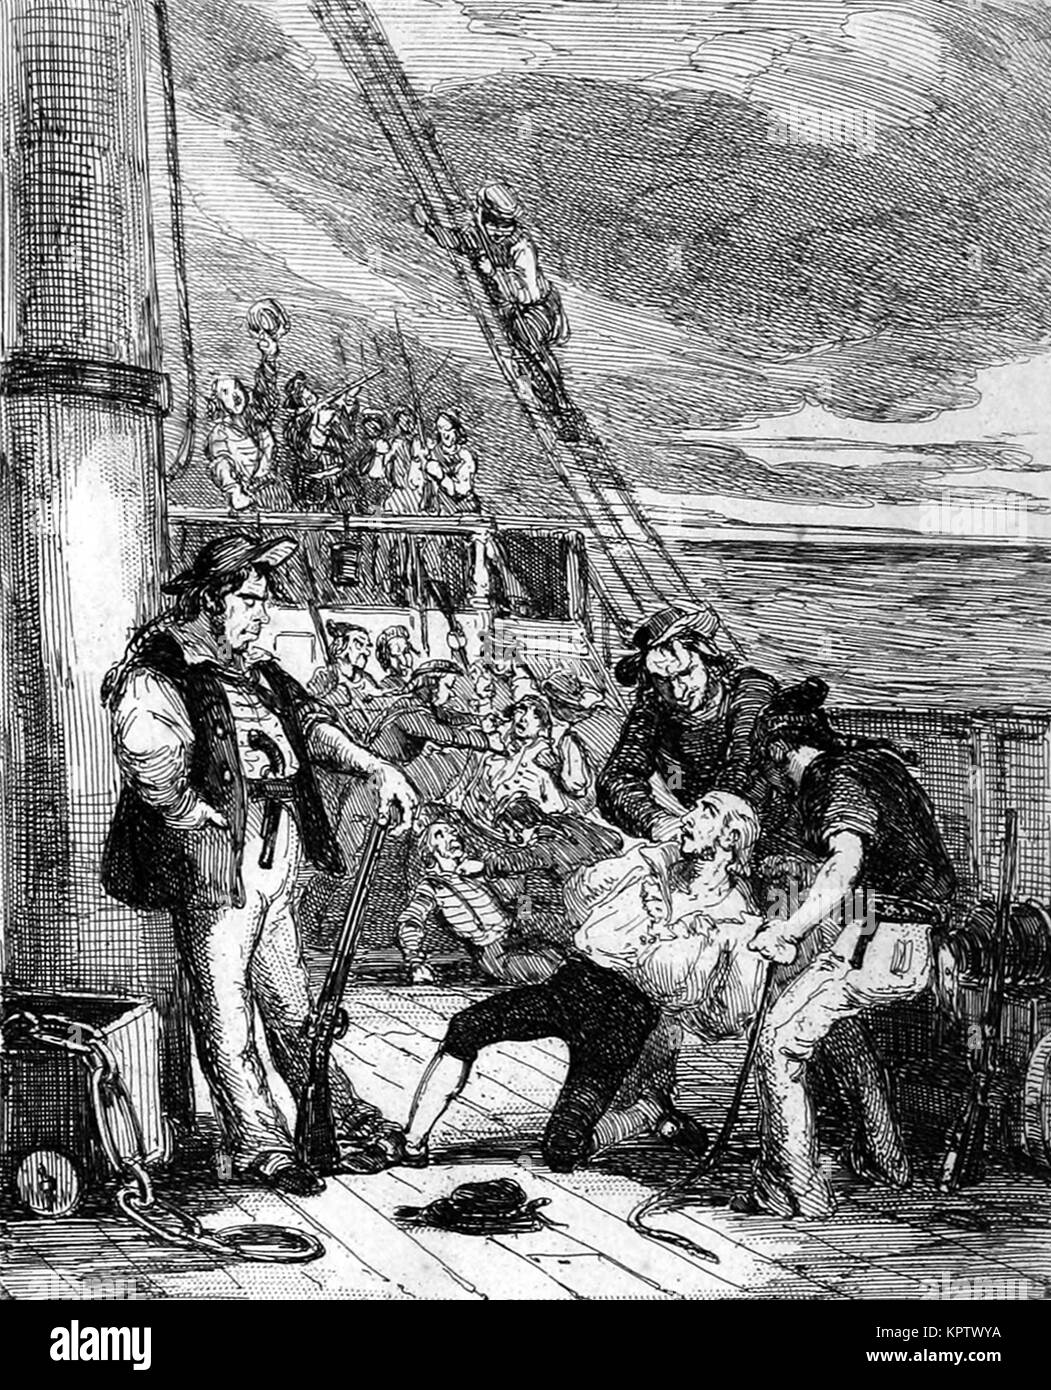 Fletcher Christian and the mutineers seize HMS Bounty on 28 April 1789. Stock Photo